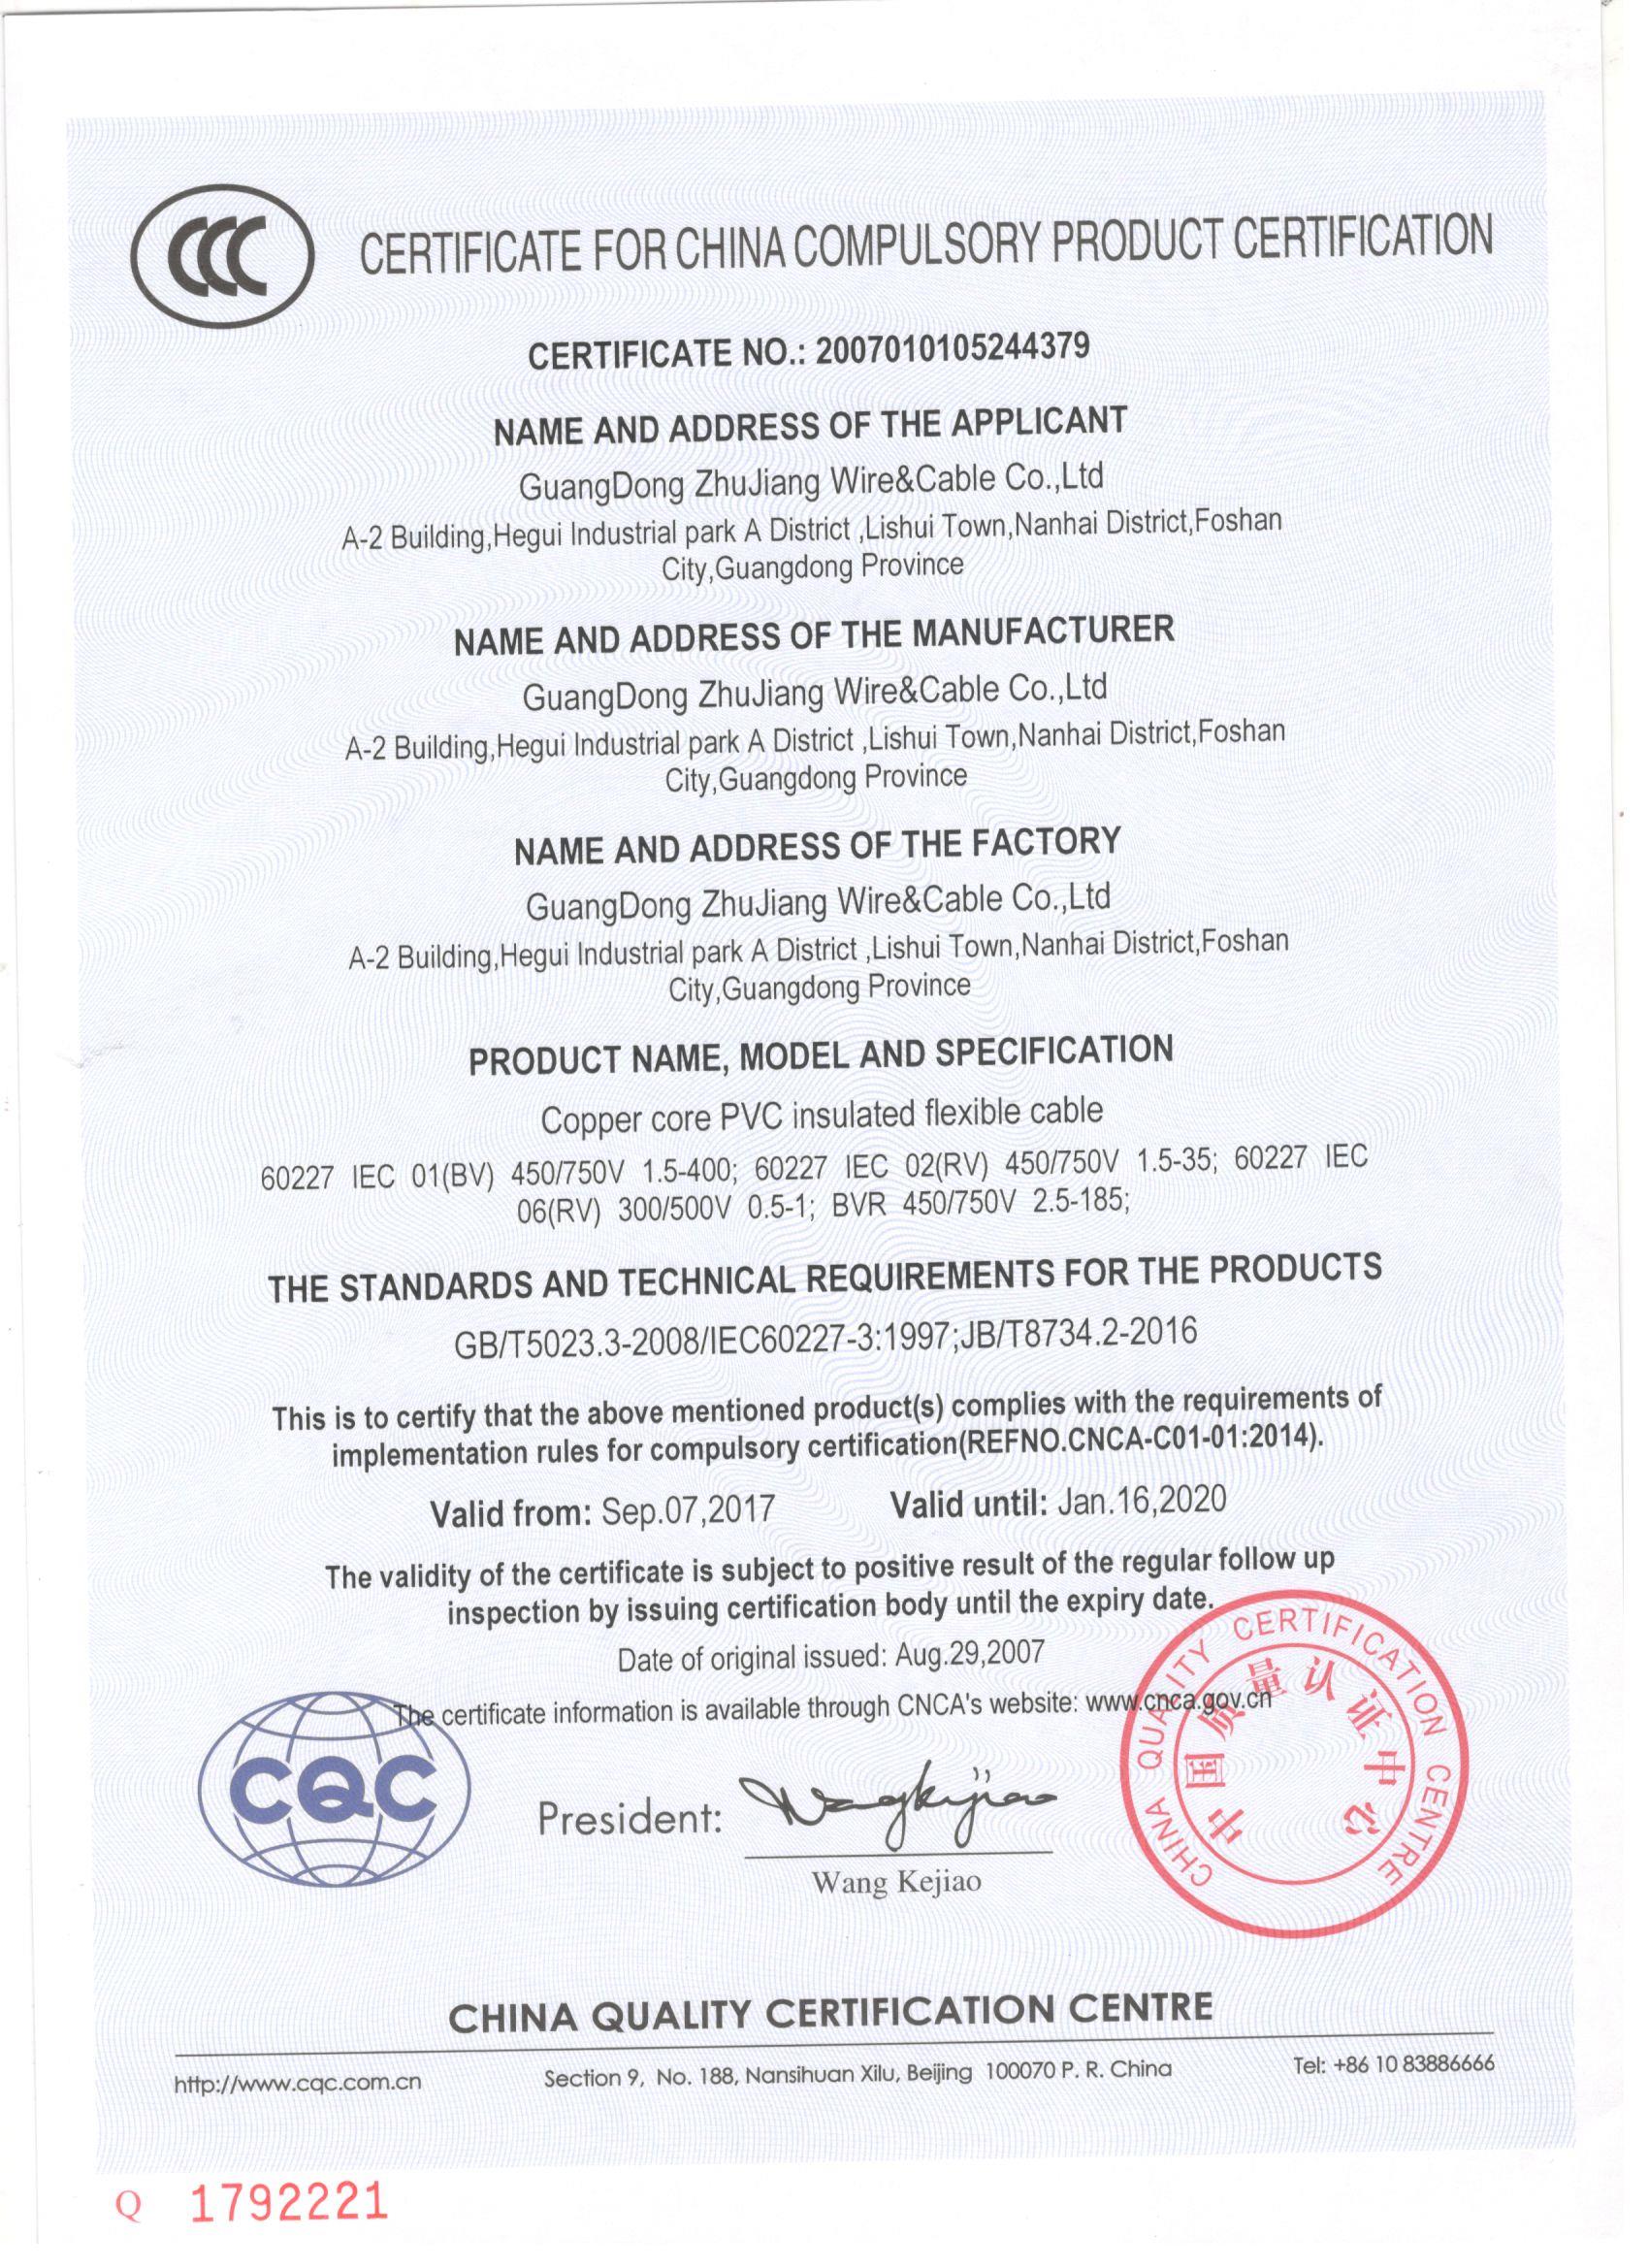 3C National Compulsory Product Certification (379-English)